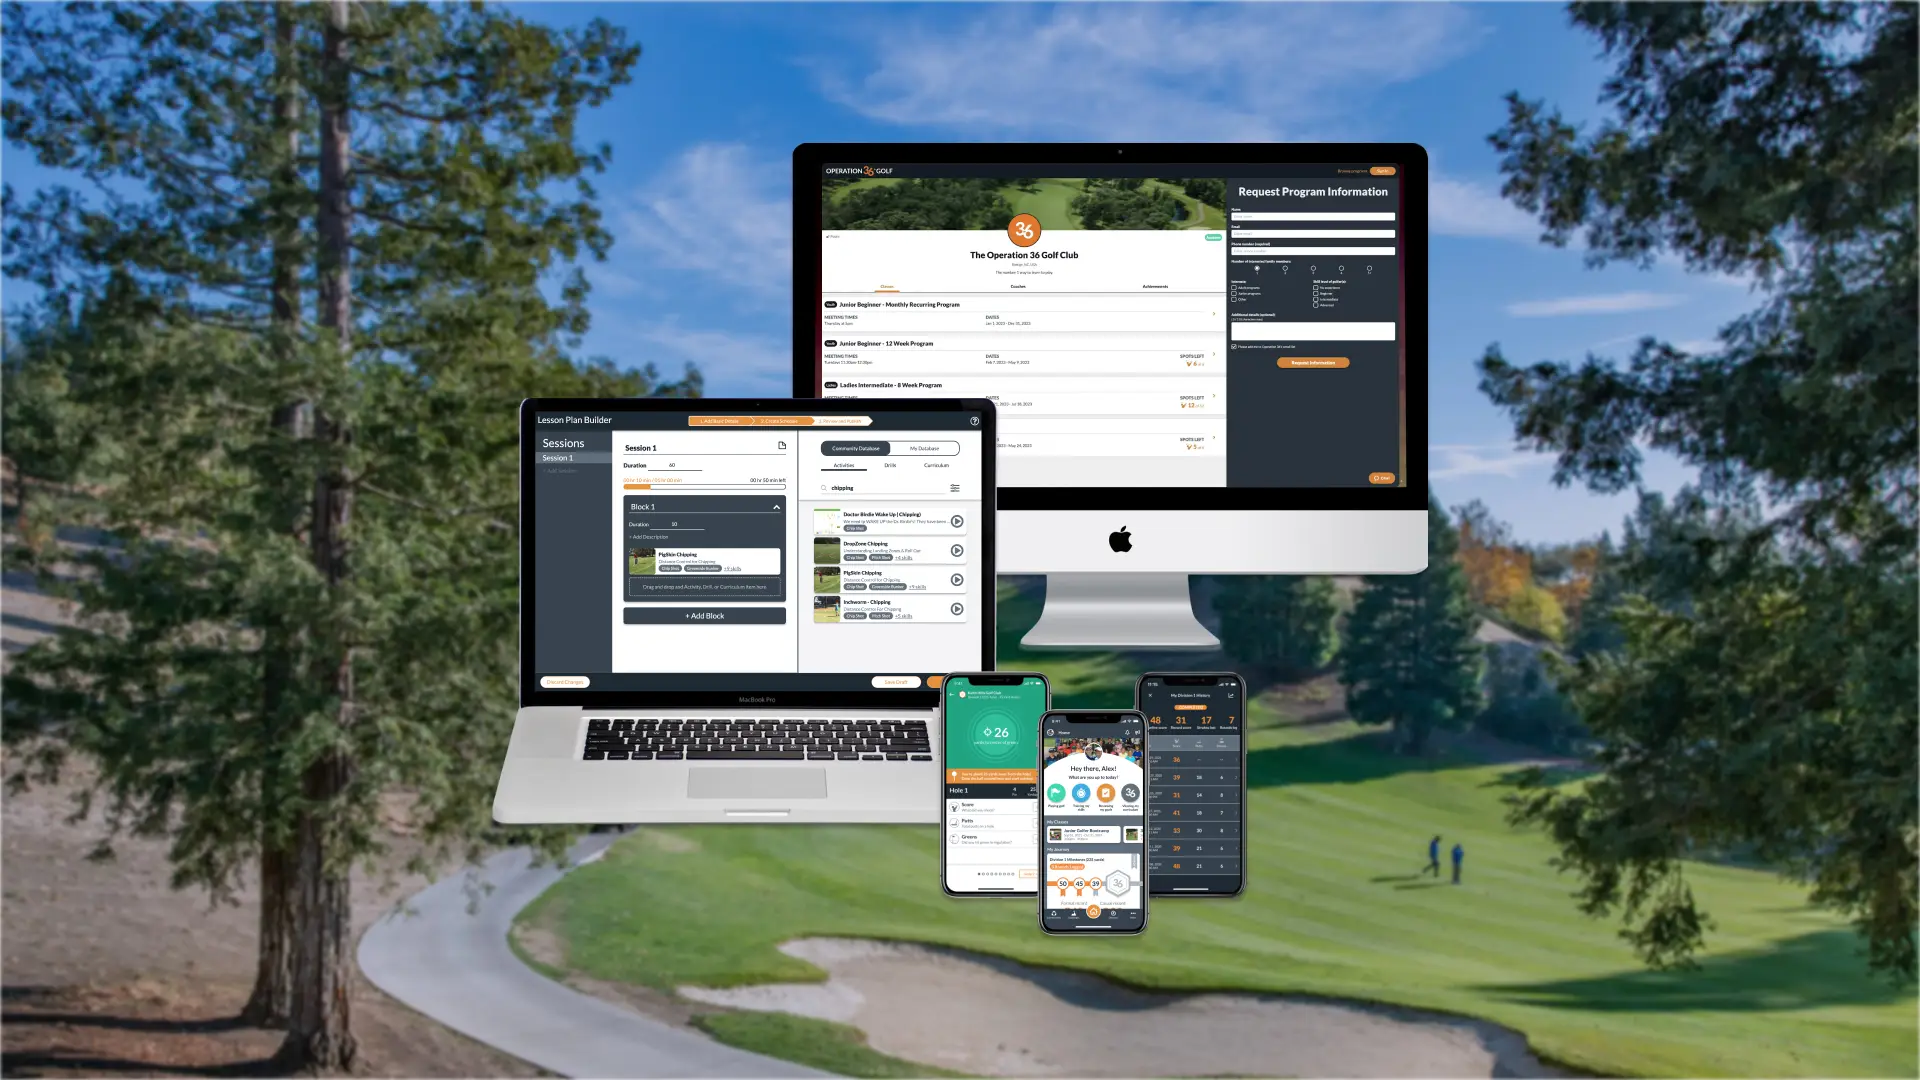 Other Operation 36 Golf features, such as the registration engine, lesson plans, and playing enhancements